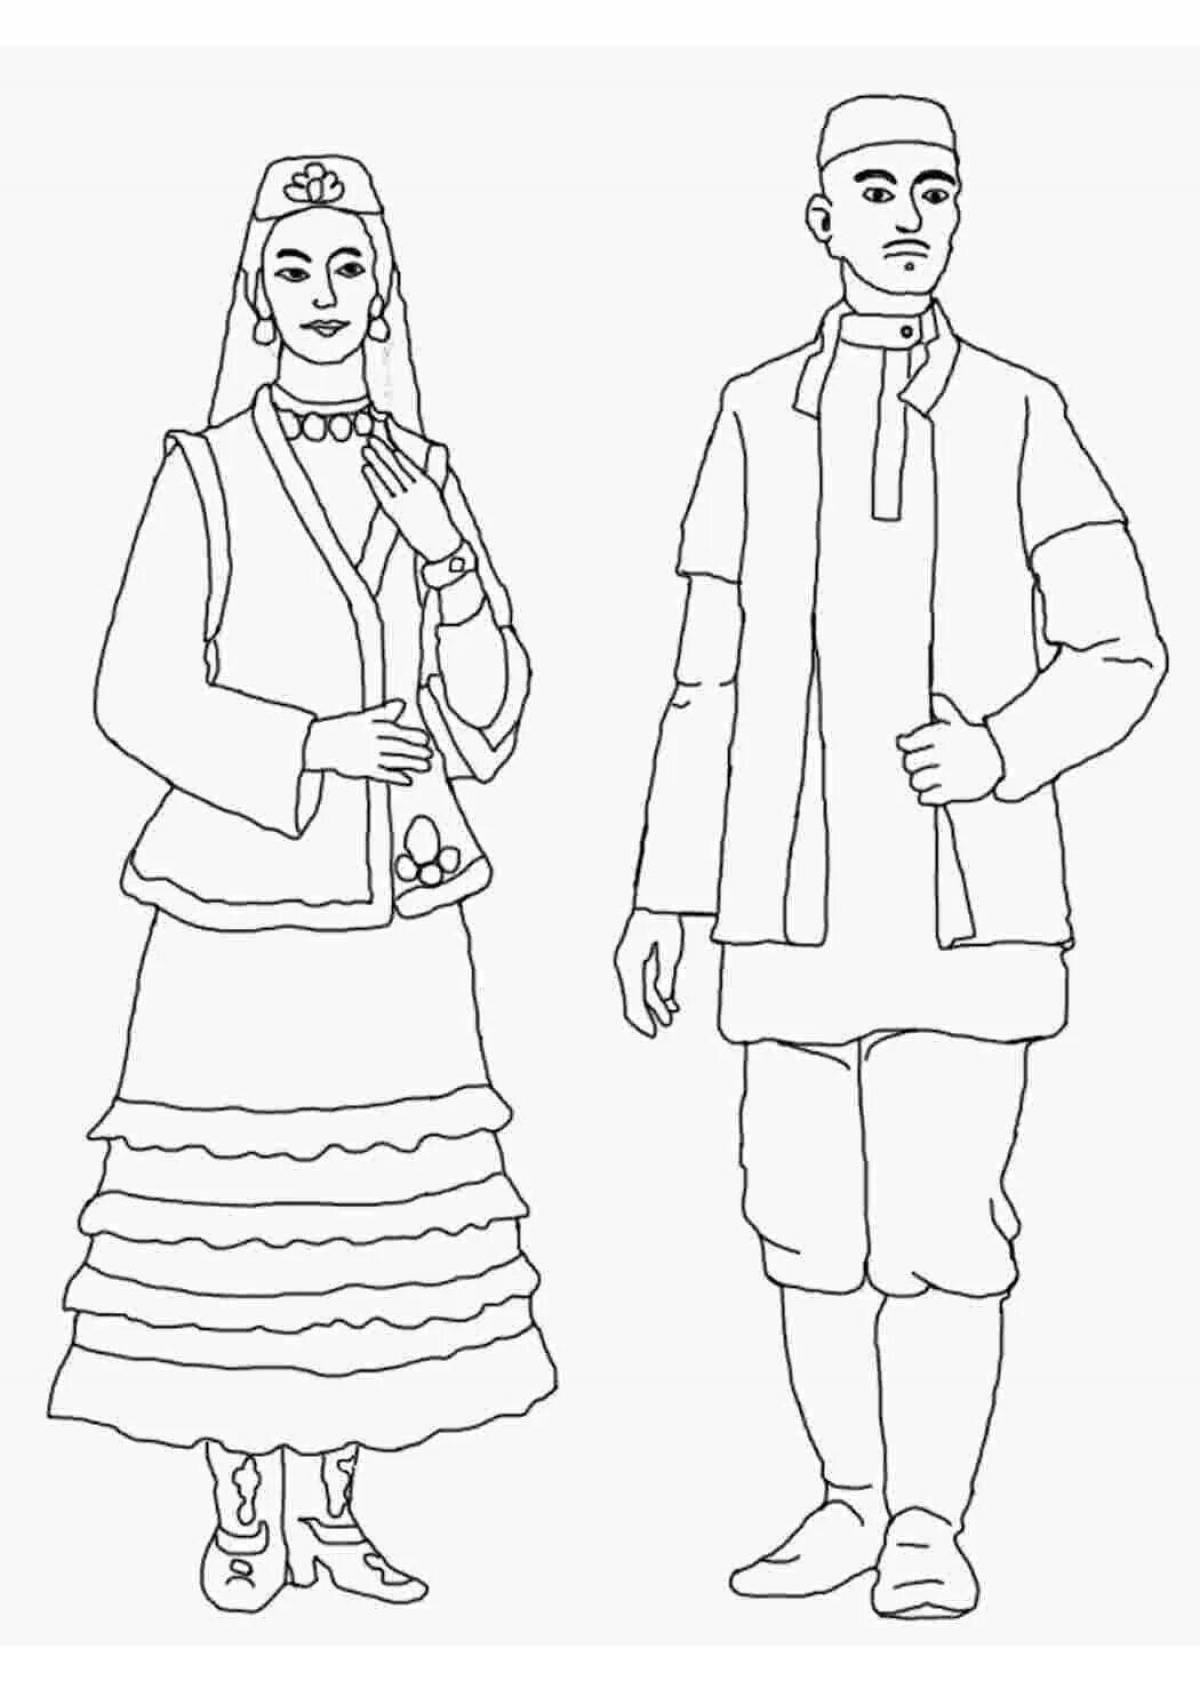 Coloring page of dramatic Tatar folk costume